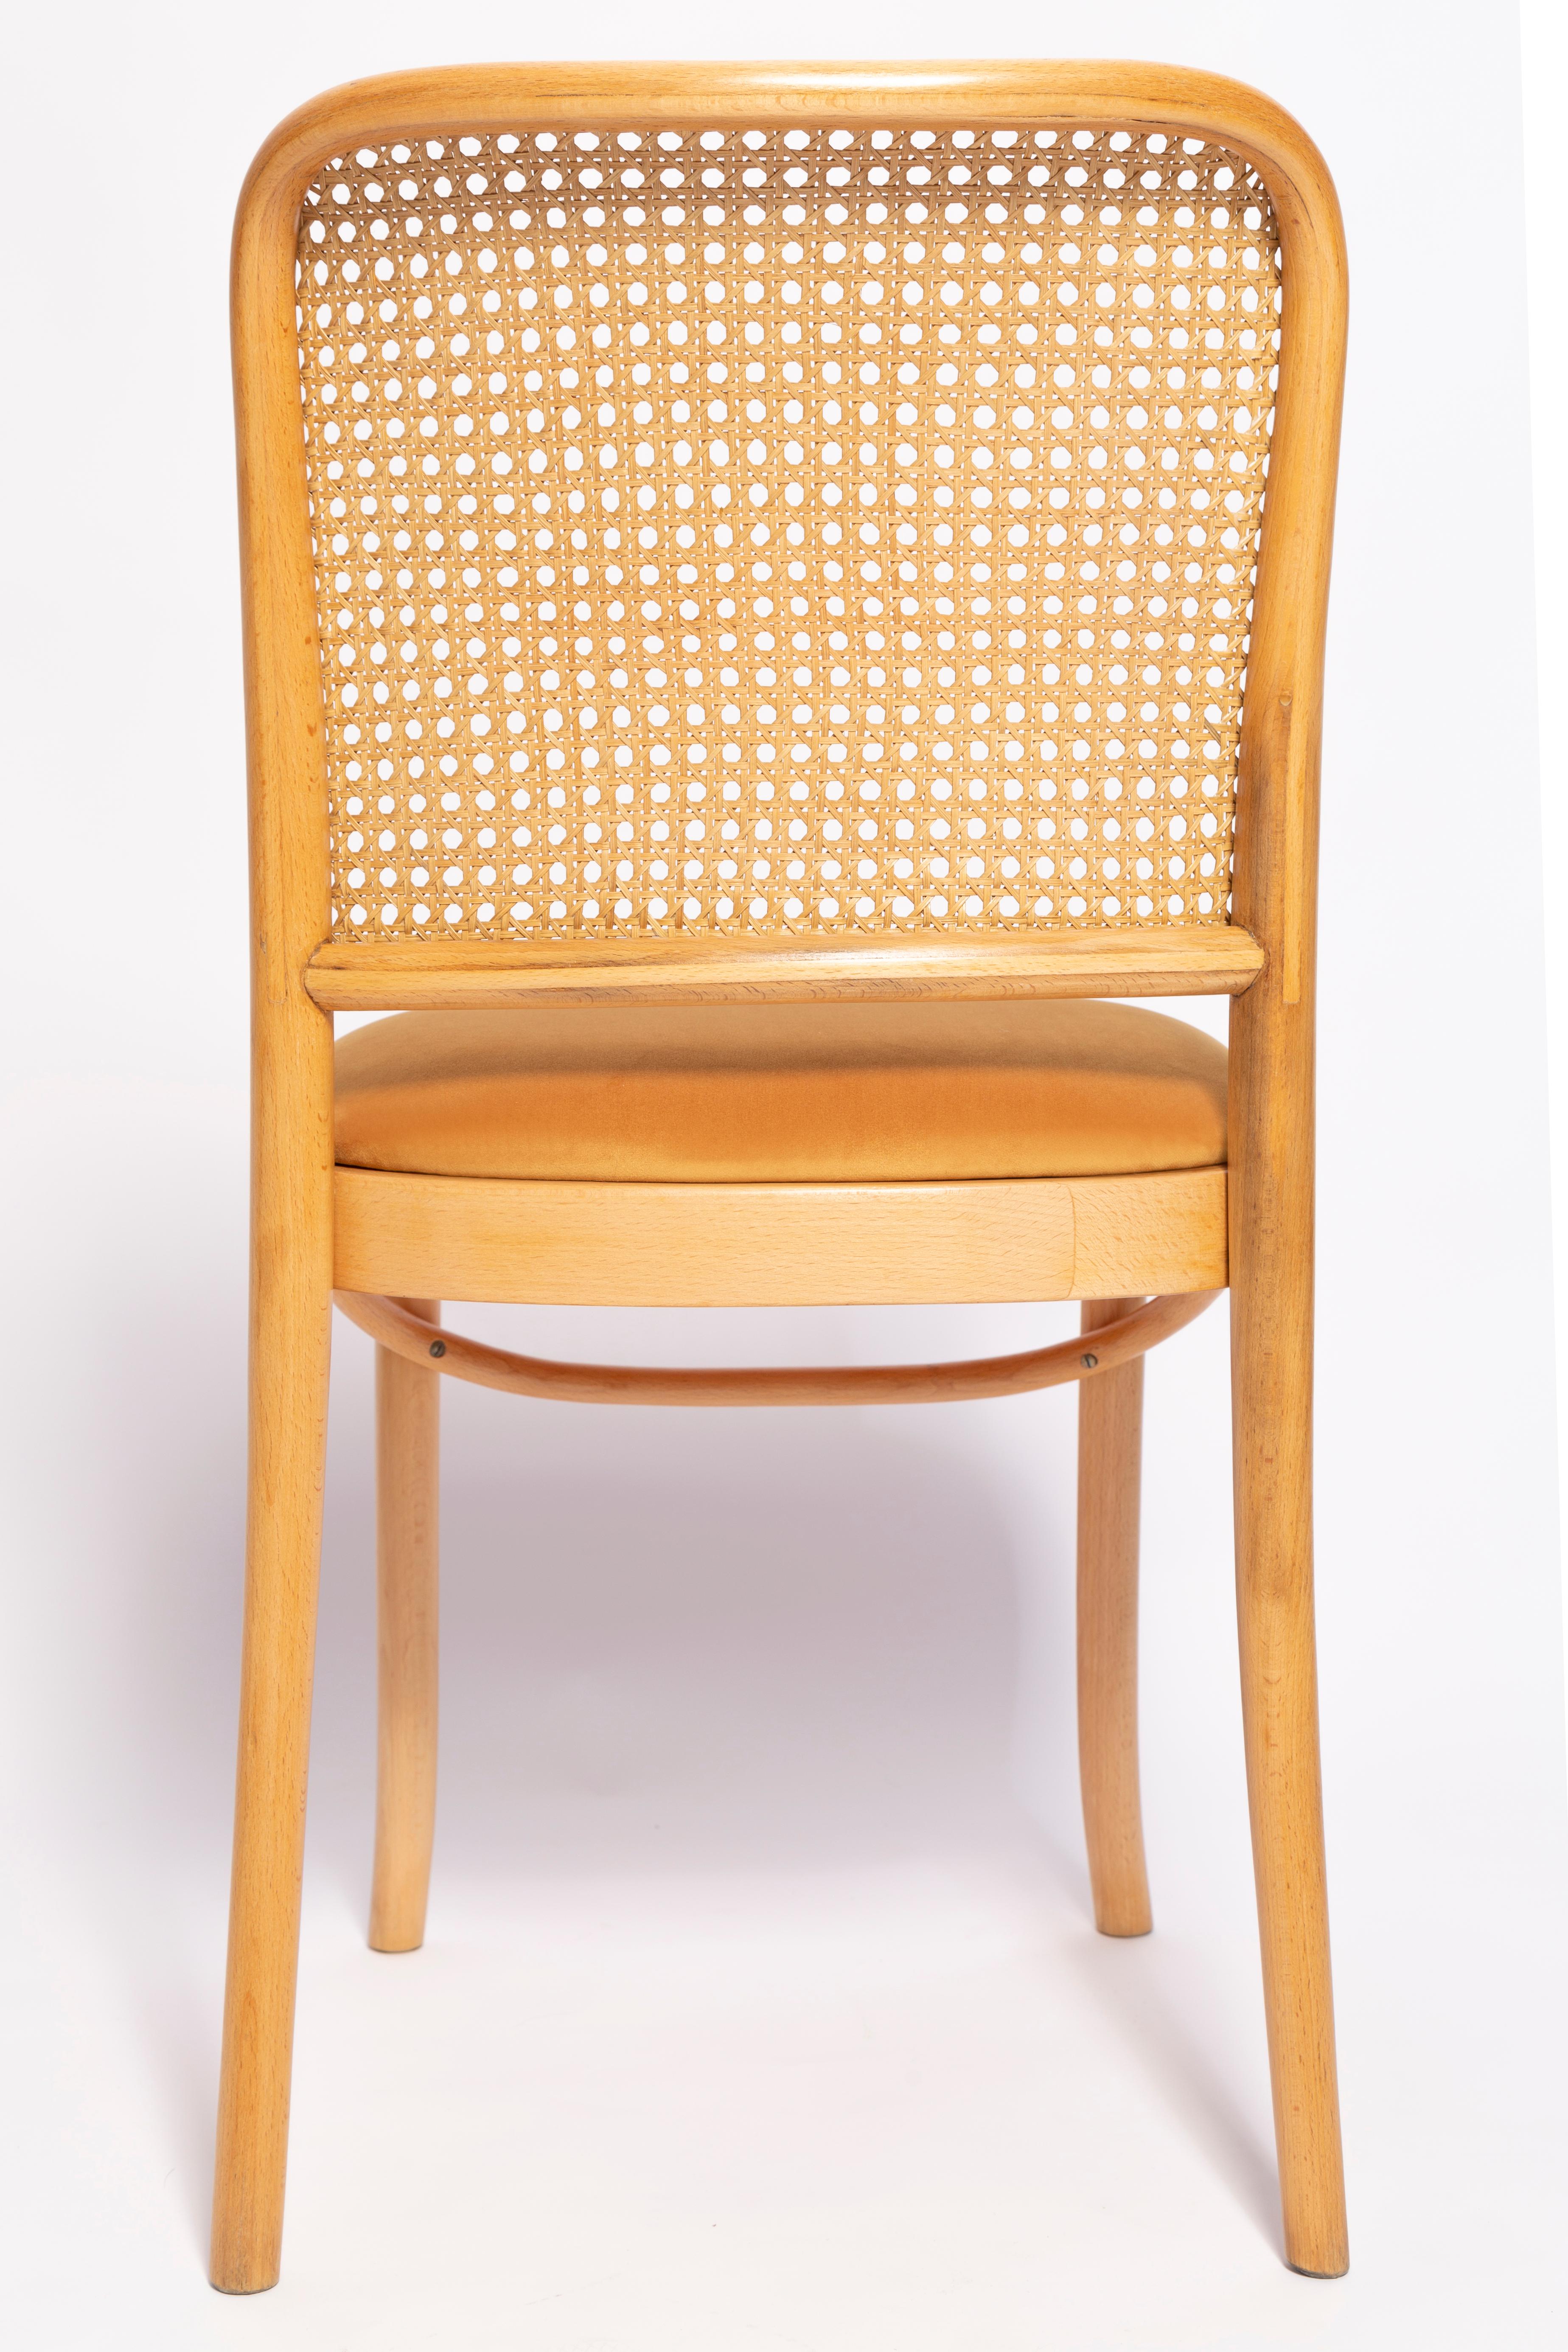 Set of Six Mid Century Yellow Velvet Thonet Wood Rattan Chairs, Europe, 1960s For Sale 5